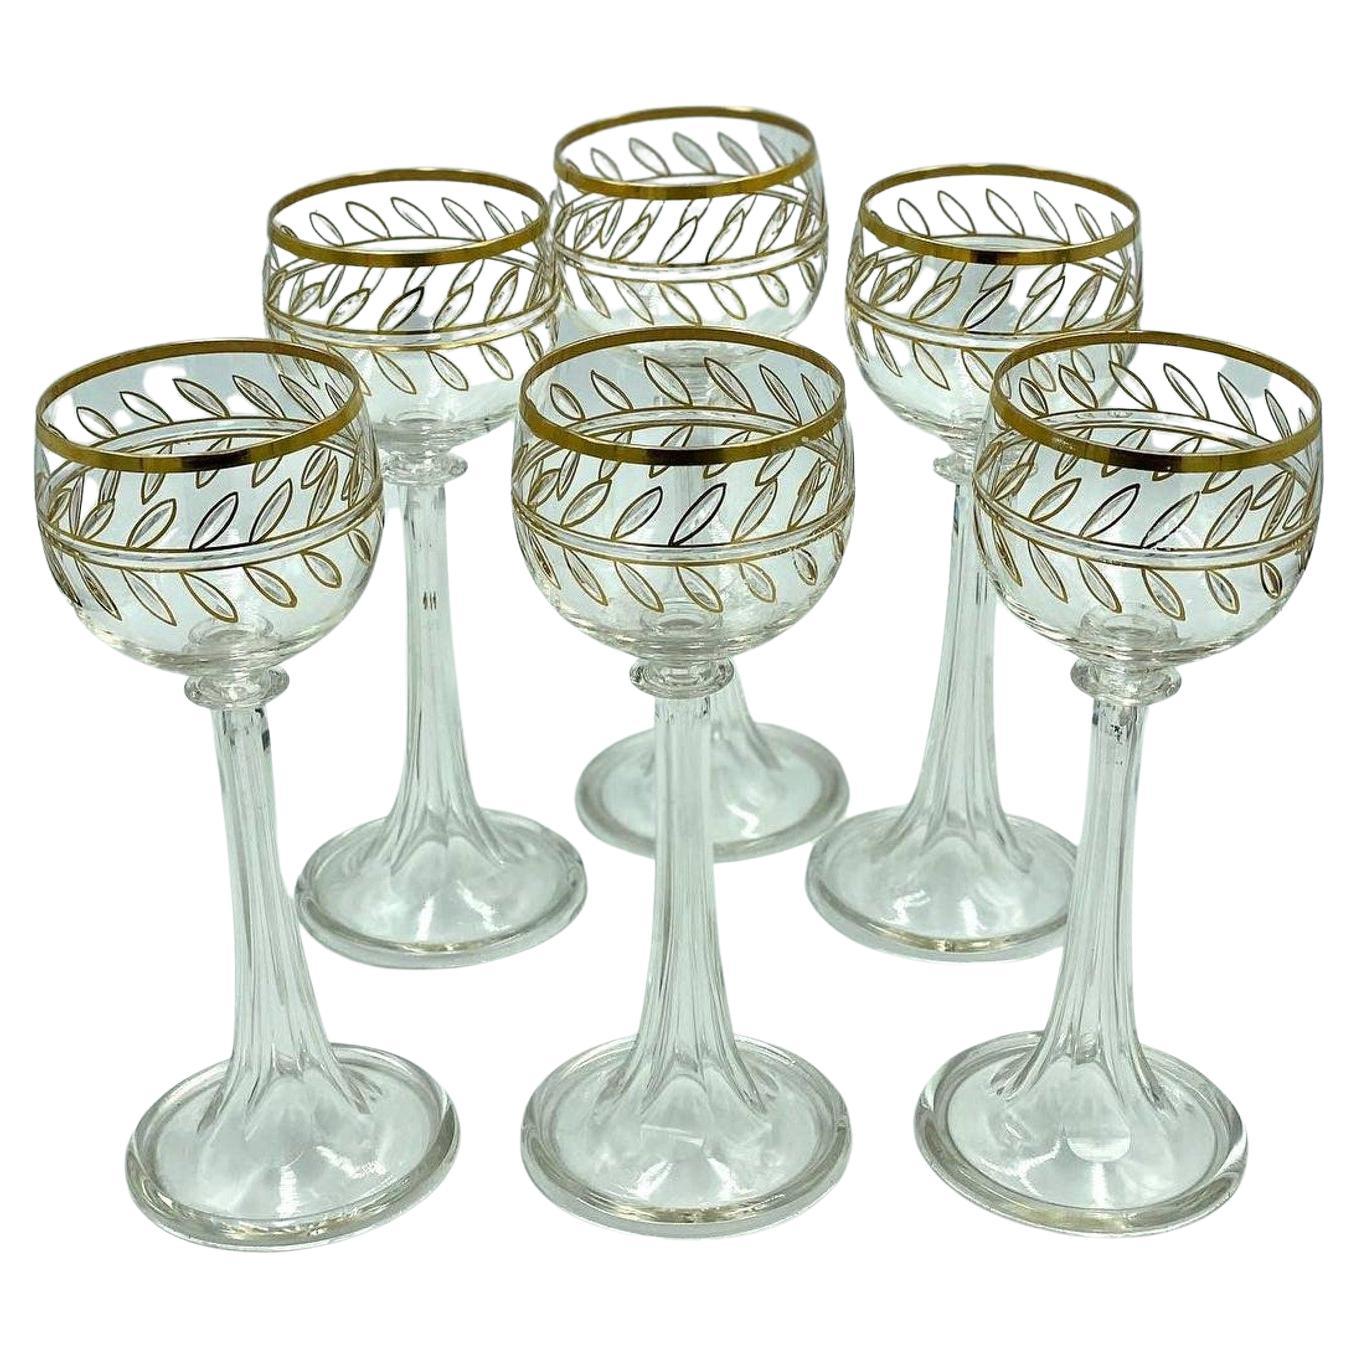 Antique Crystal Glasses With 24K gold  Amazing Rare Set Of Crystal Glasses For Sale